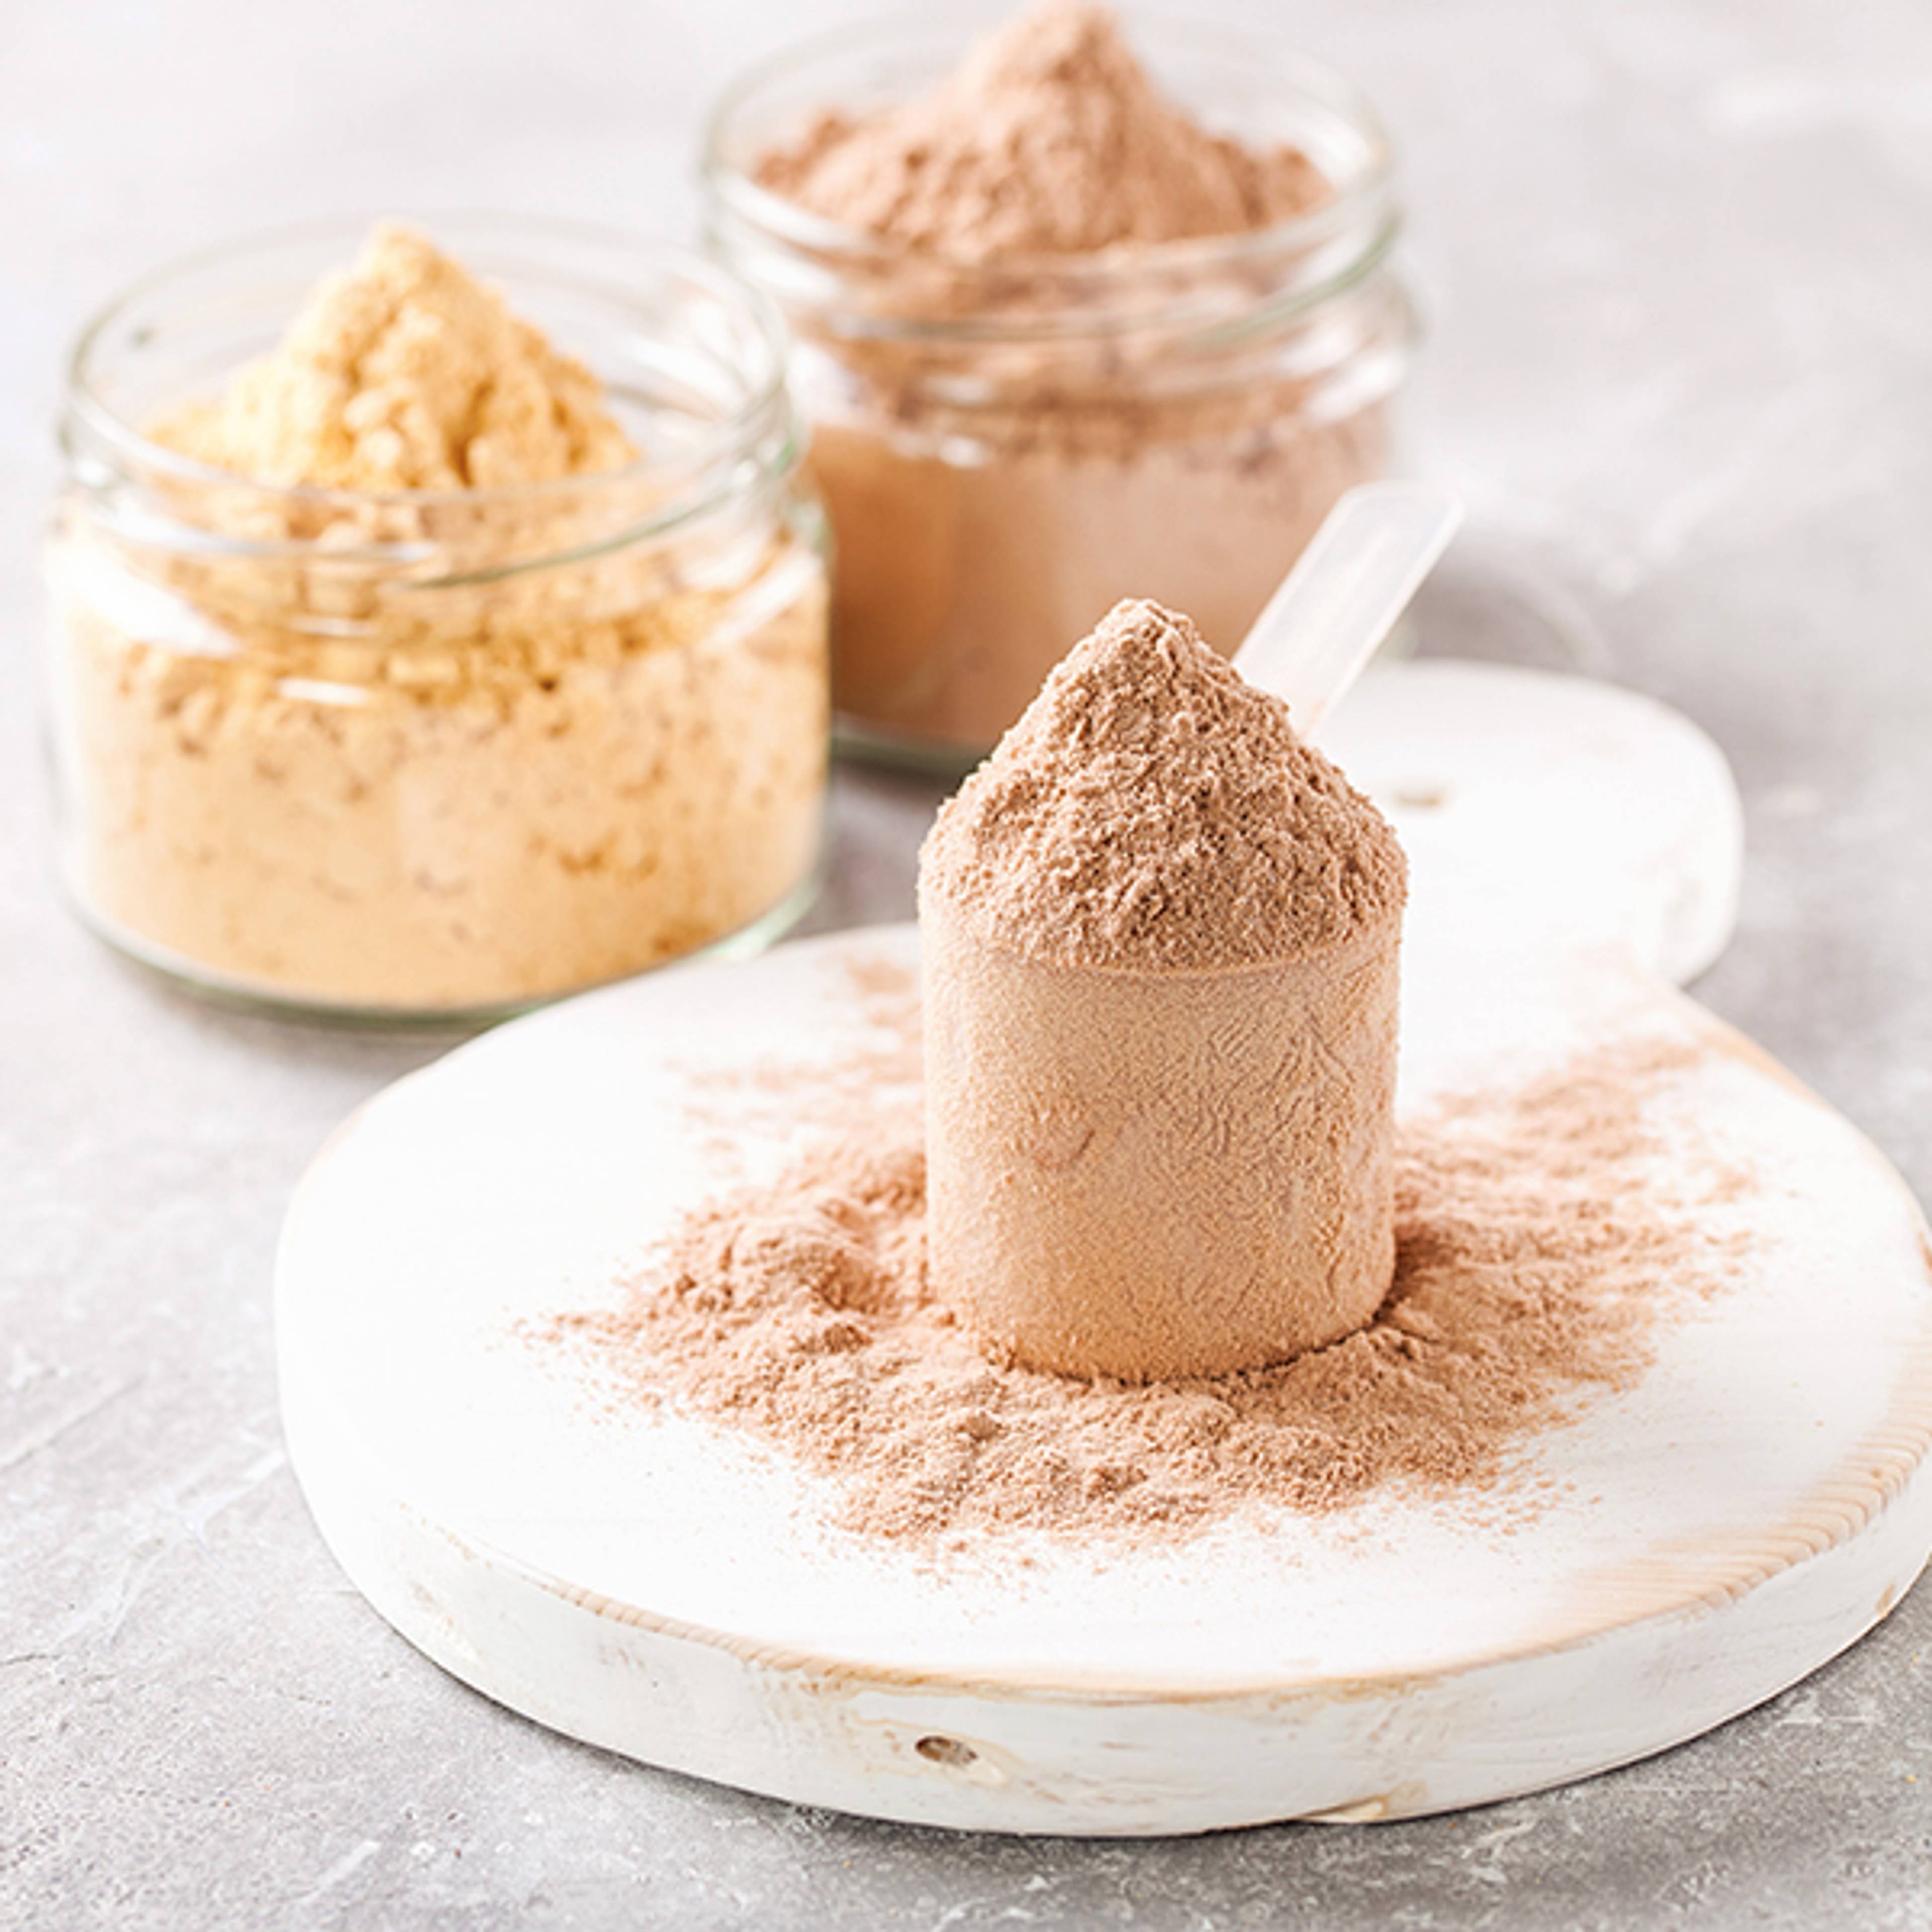 Protein powder for losing weight and building muscles